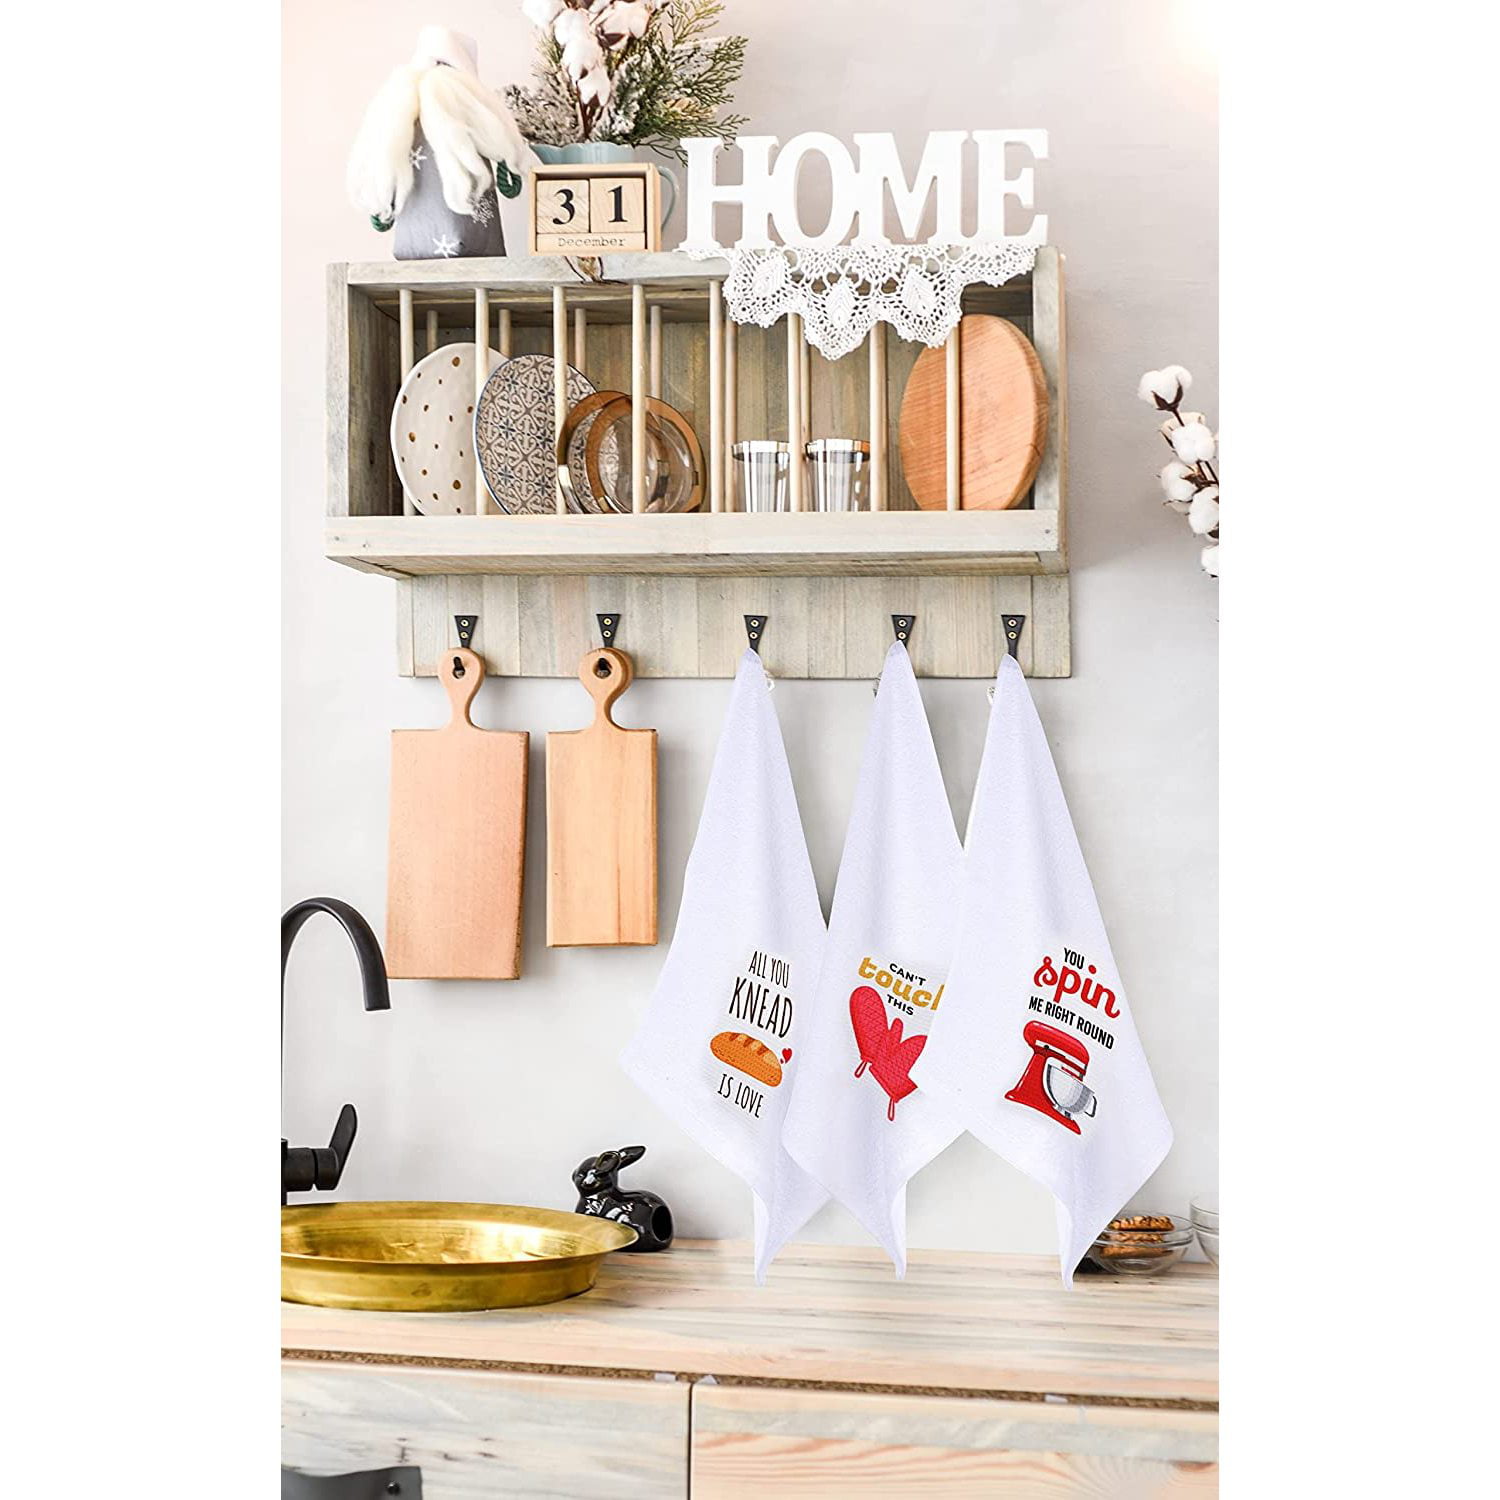 Funny Kitchen Towels and Dishcloths Sets of 4 - Dish Towels for Washing Drying  Dishes - Decorative Waffle Towels - China Kitchen Towel and Tea Towel price